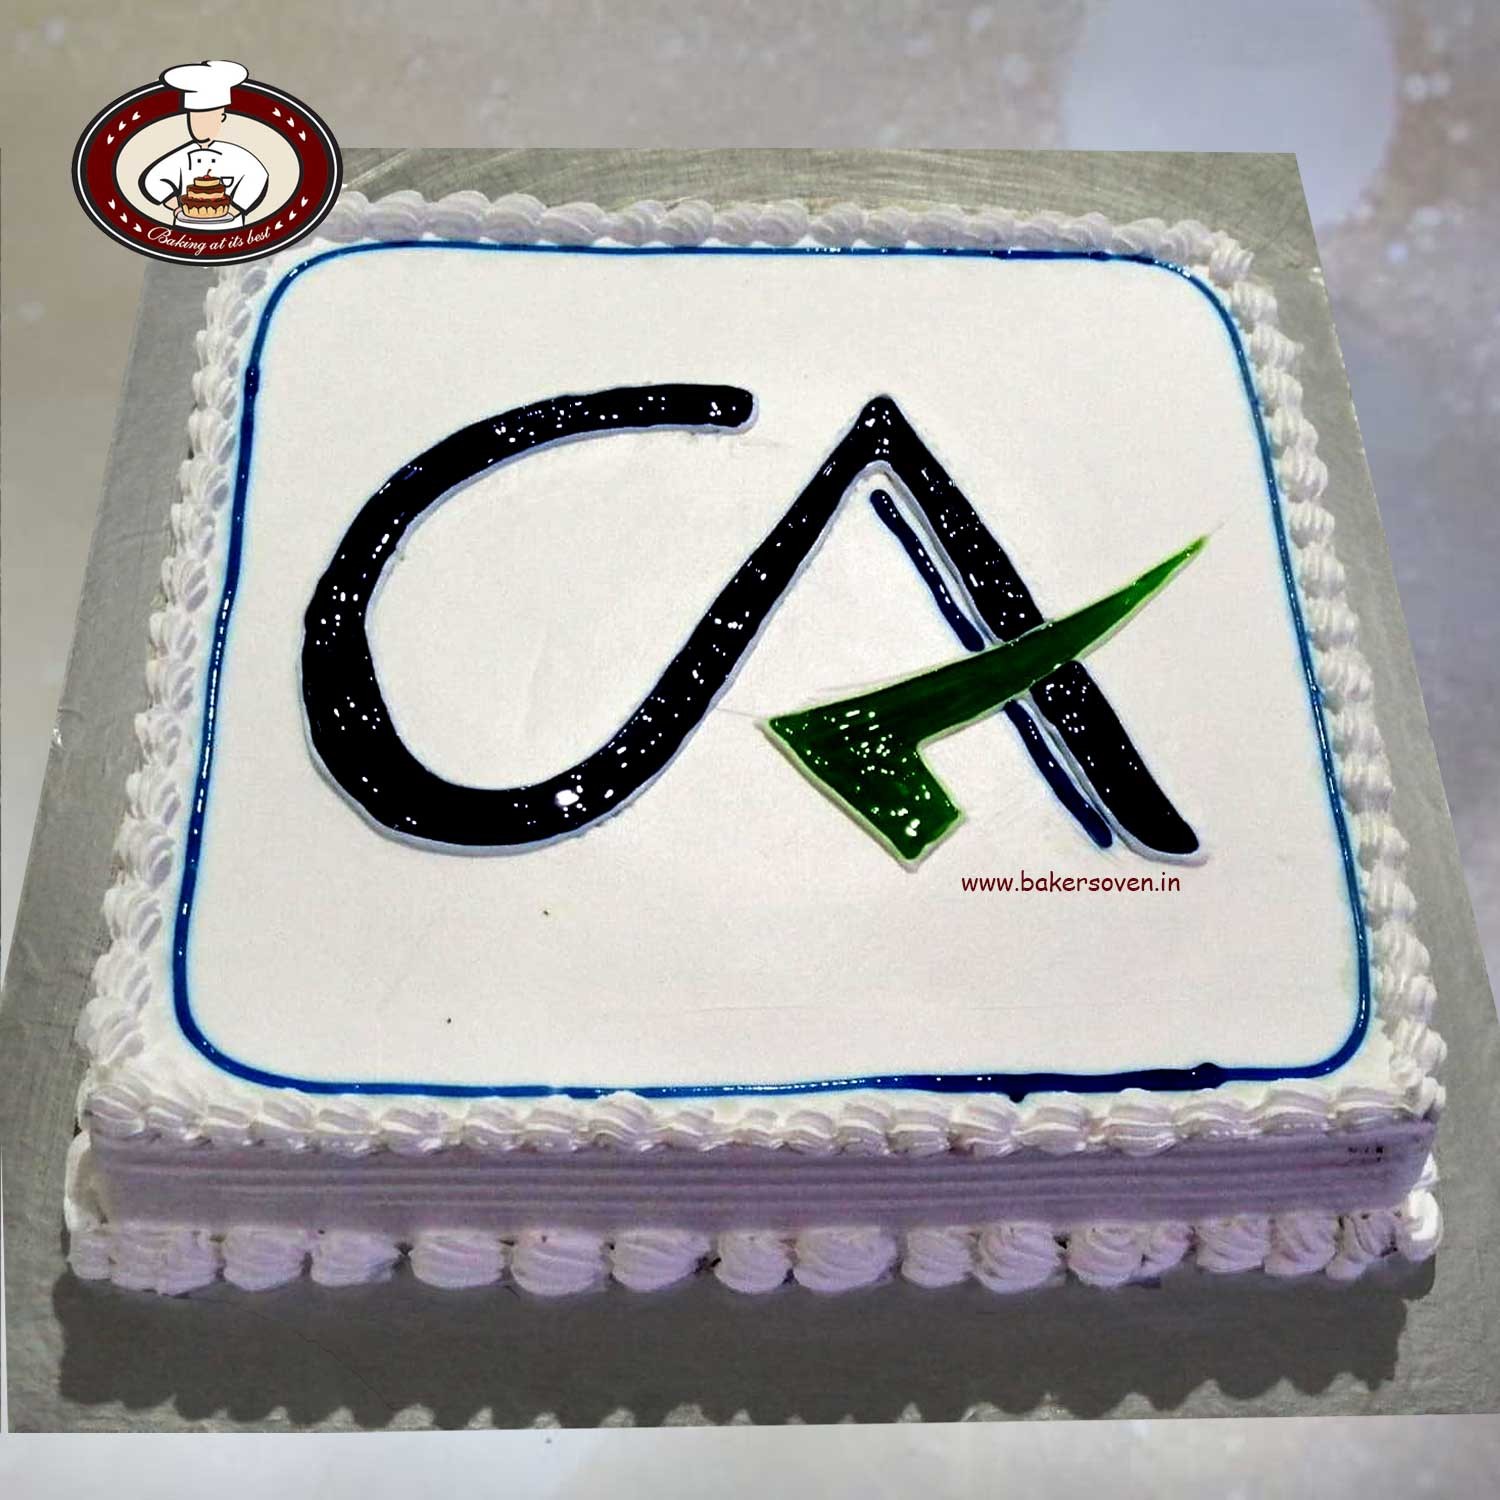 Sonu's cake factory - Cake for CA...!! For husband from loving wife on his  birthday!! Specific design given by her, we made replica of it. 